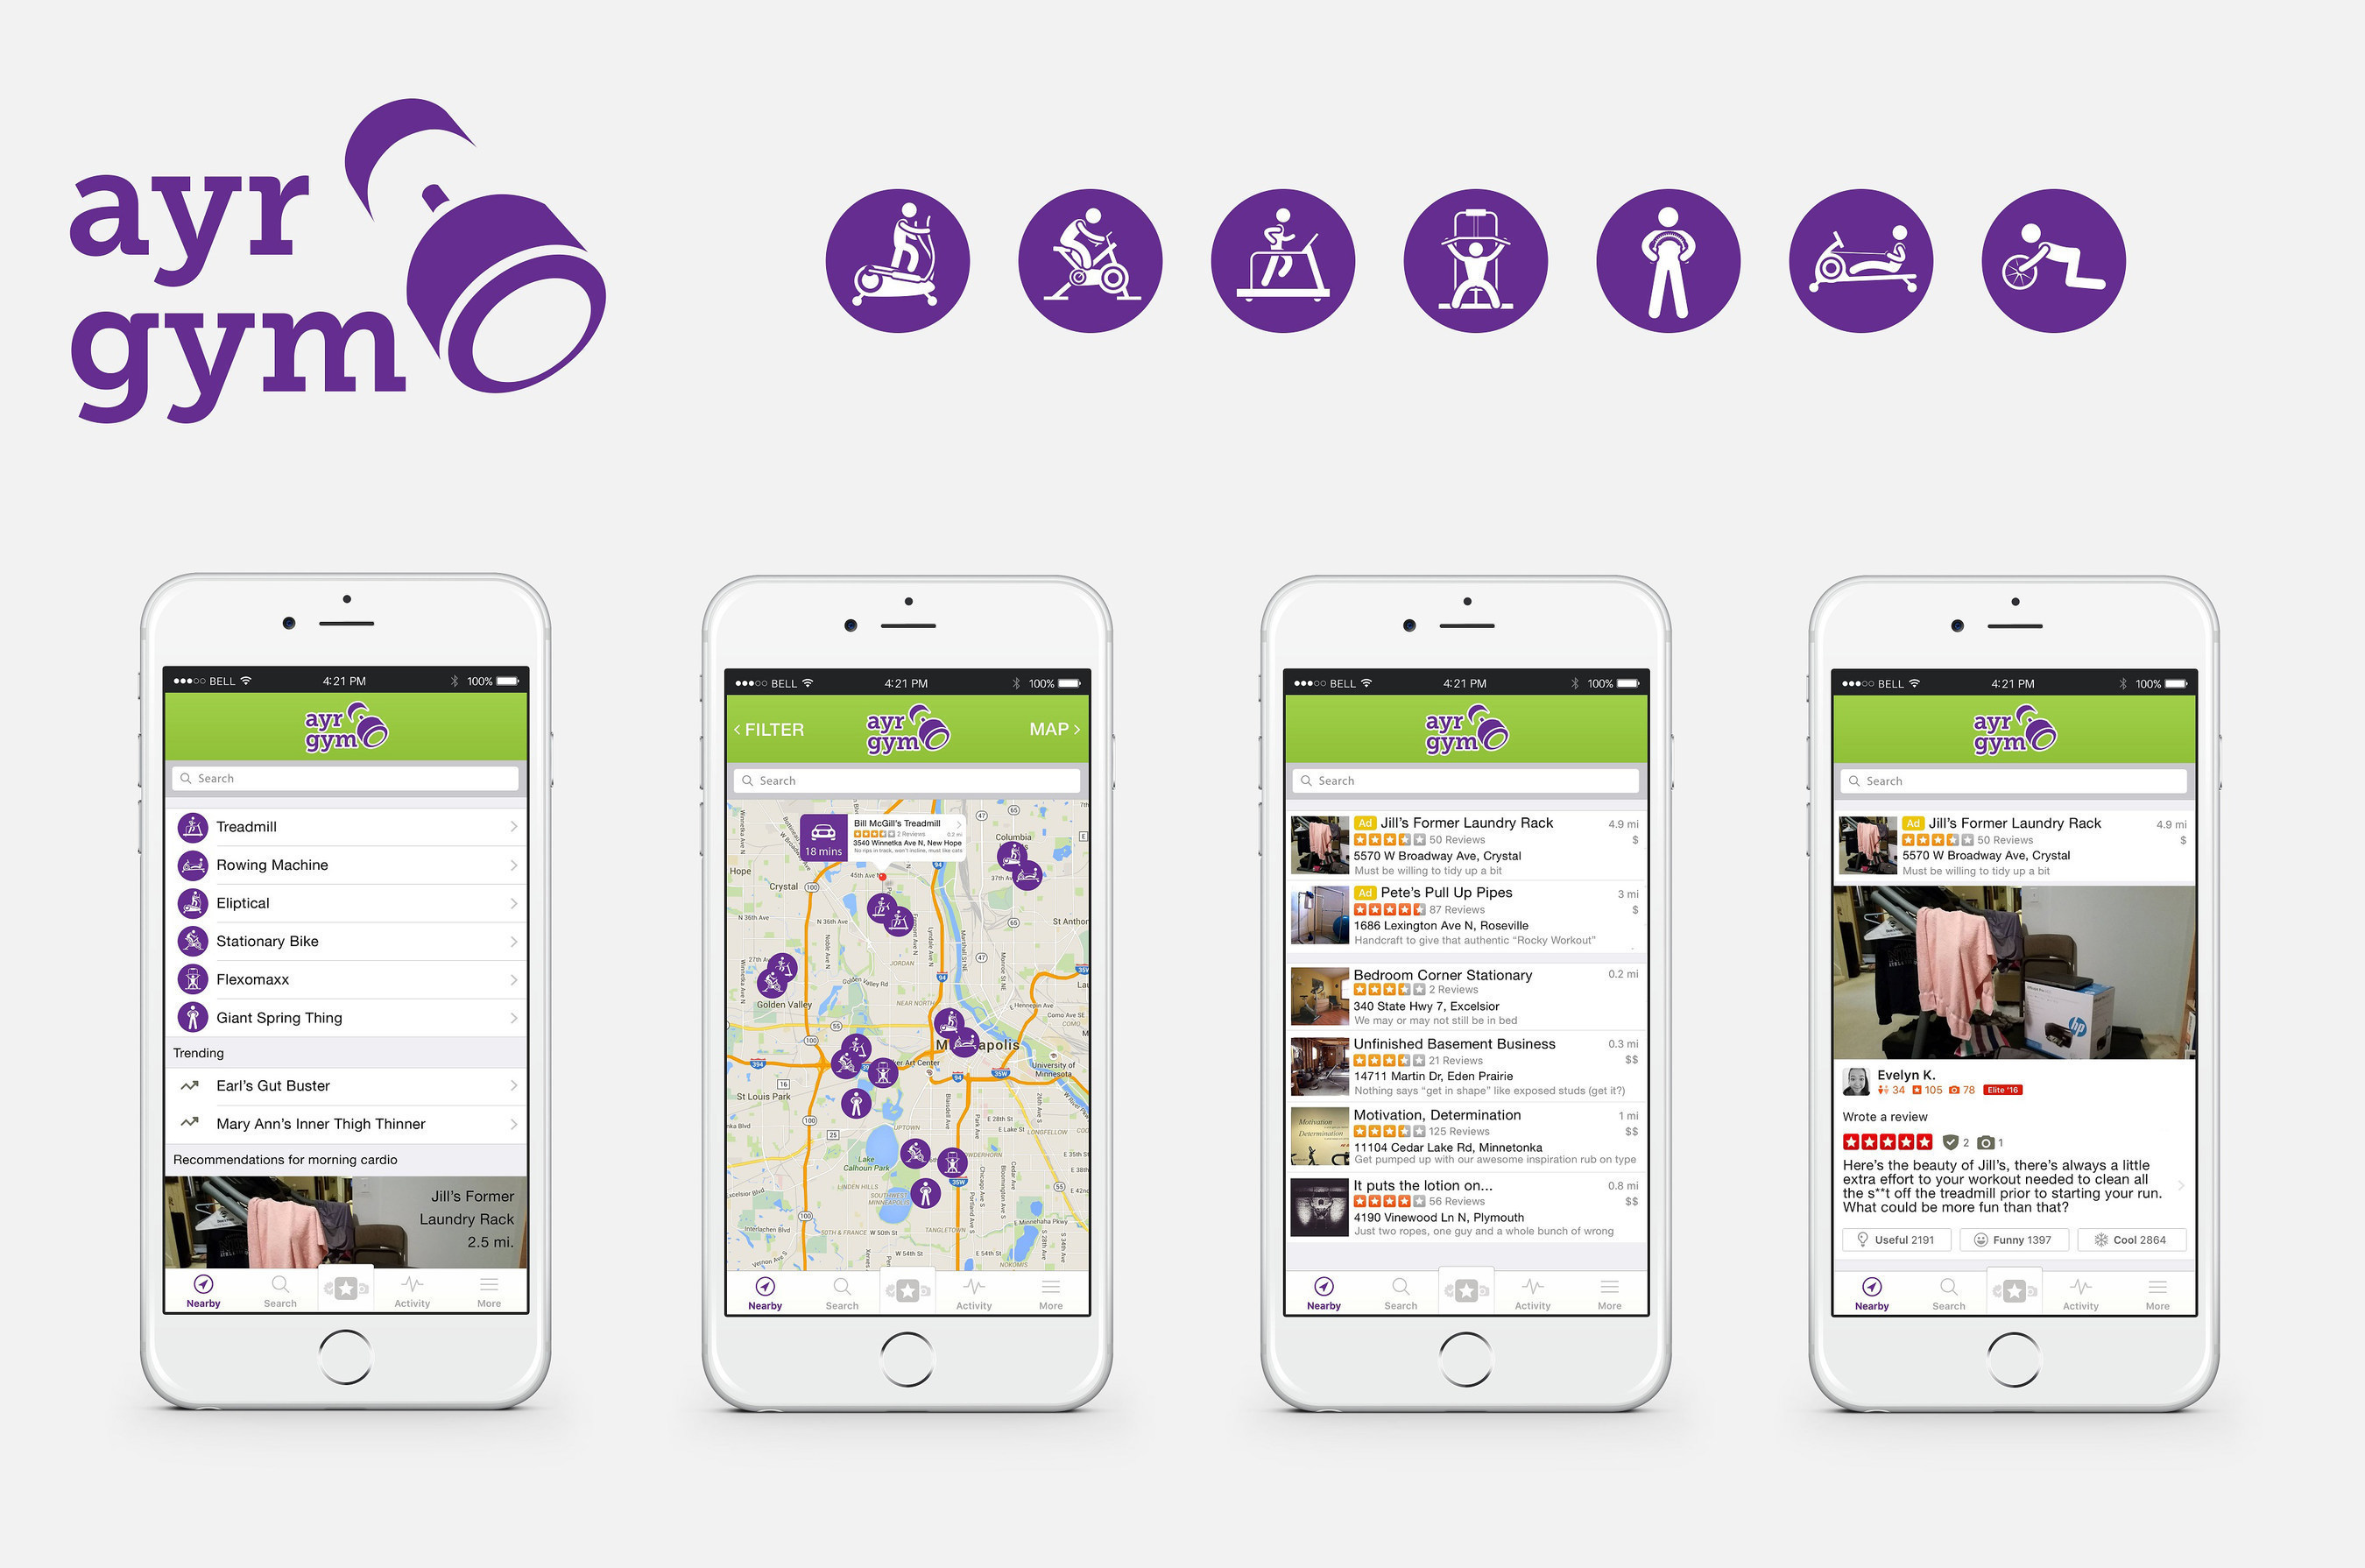 New Anytime Fitness App will allow people to rent their home fitness equipment by the hour